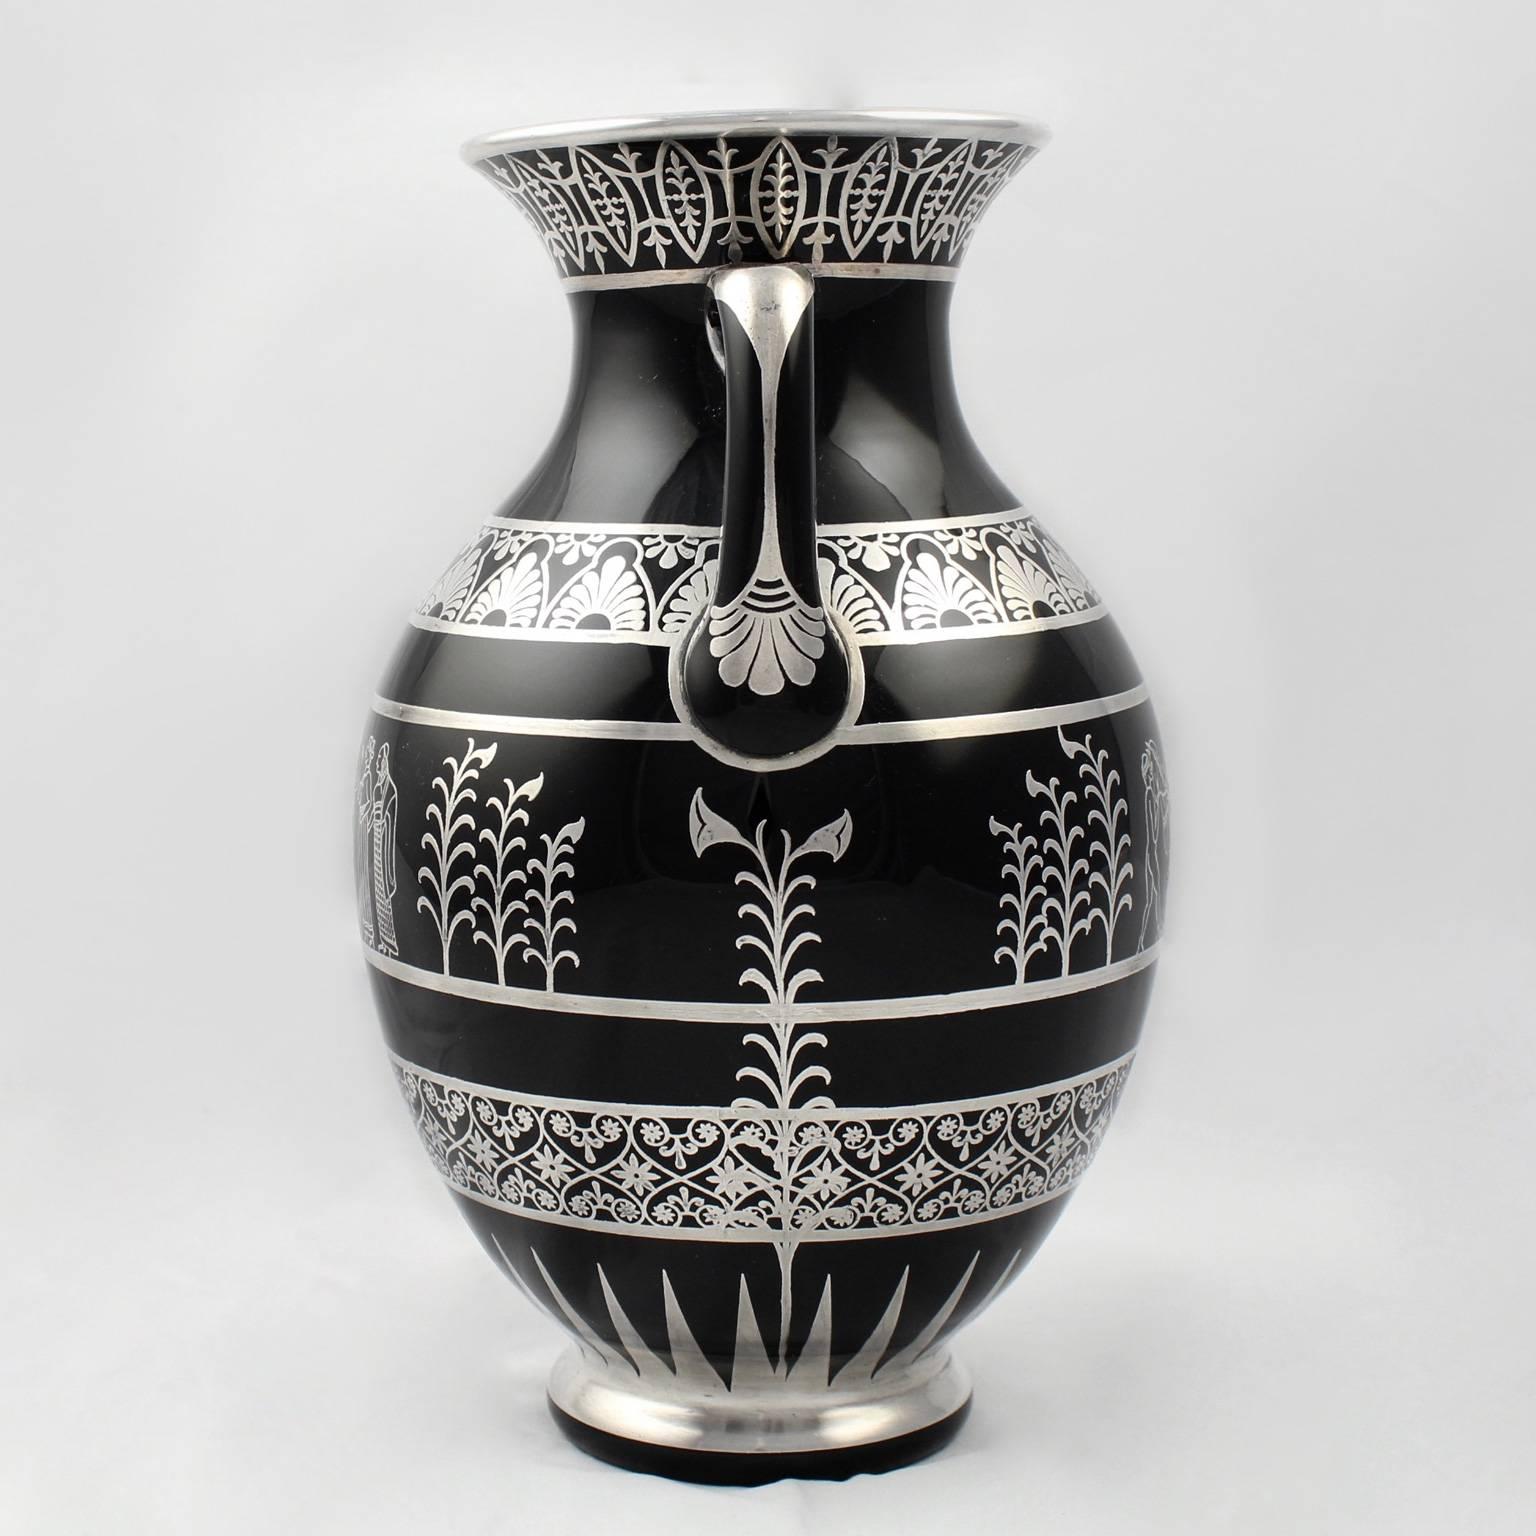 A fine Art Deco period, Greek Revival style black glass silver overlay vase by the Rockwell Silver Company. A terrifically rare form for this early American silver overlay company. 

The central motif depicts two nude males attending a horse and